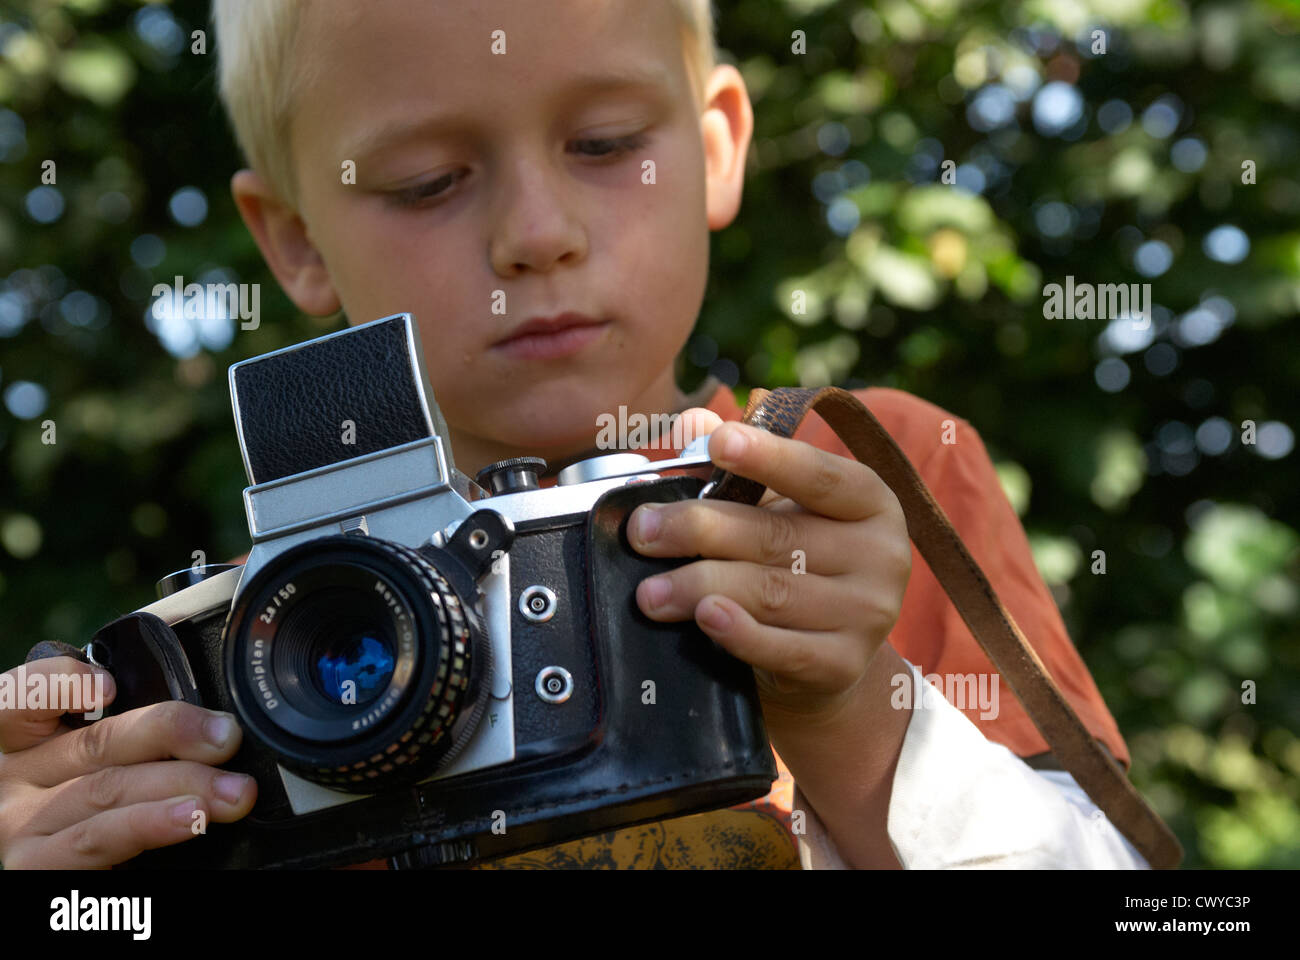 Child blond boy holding and photographing with vintage camera outside summertime Stock Photo